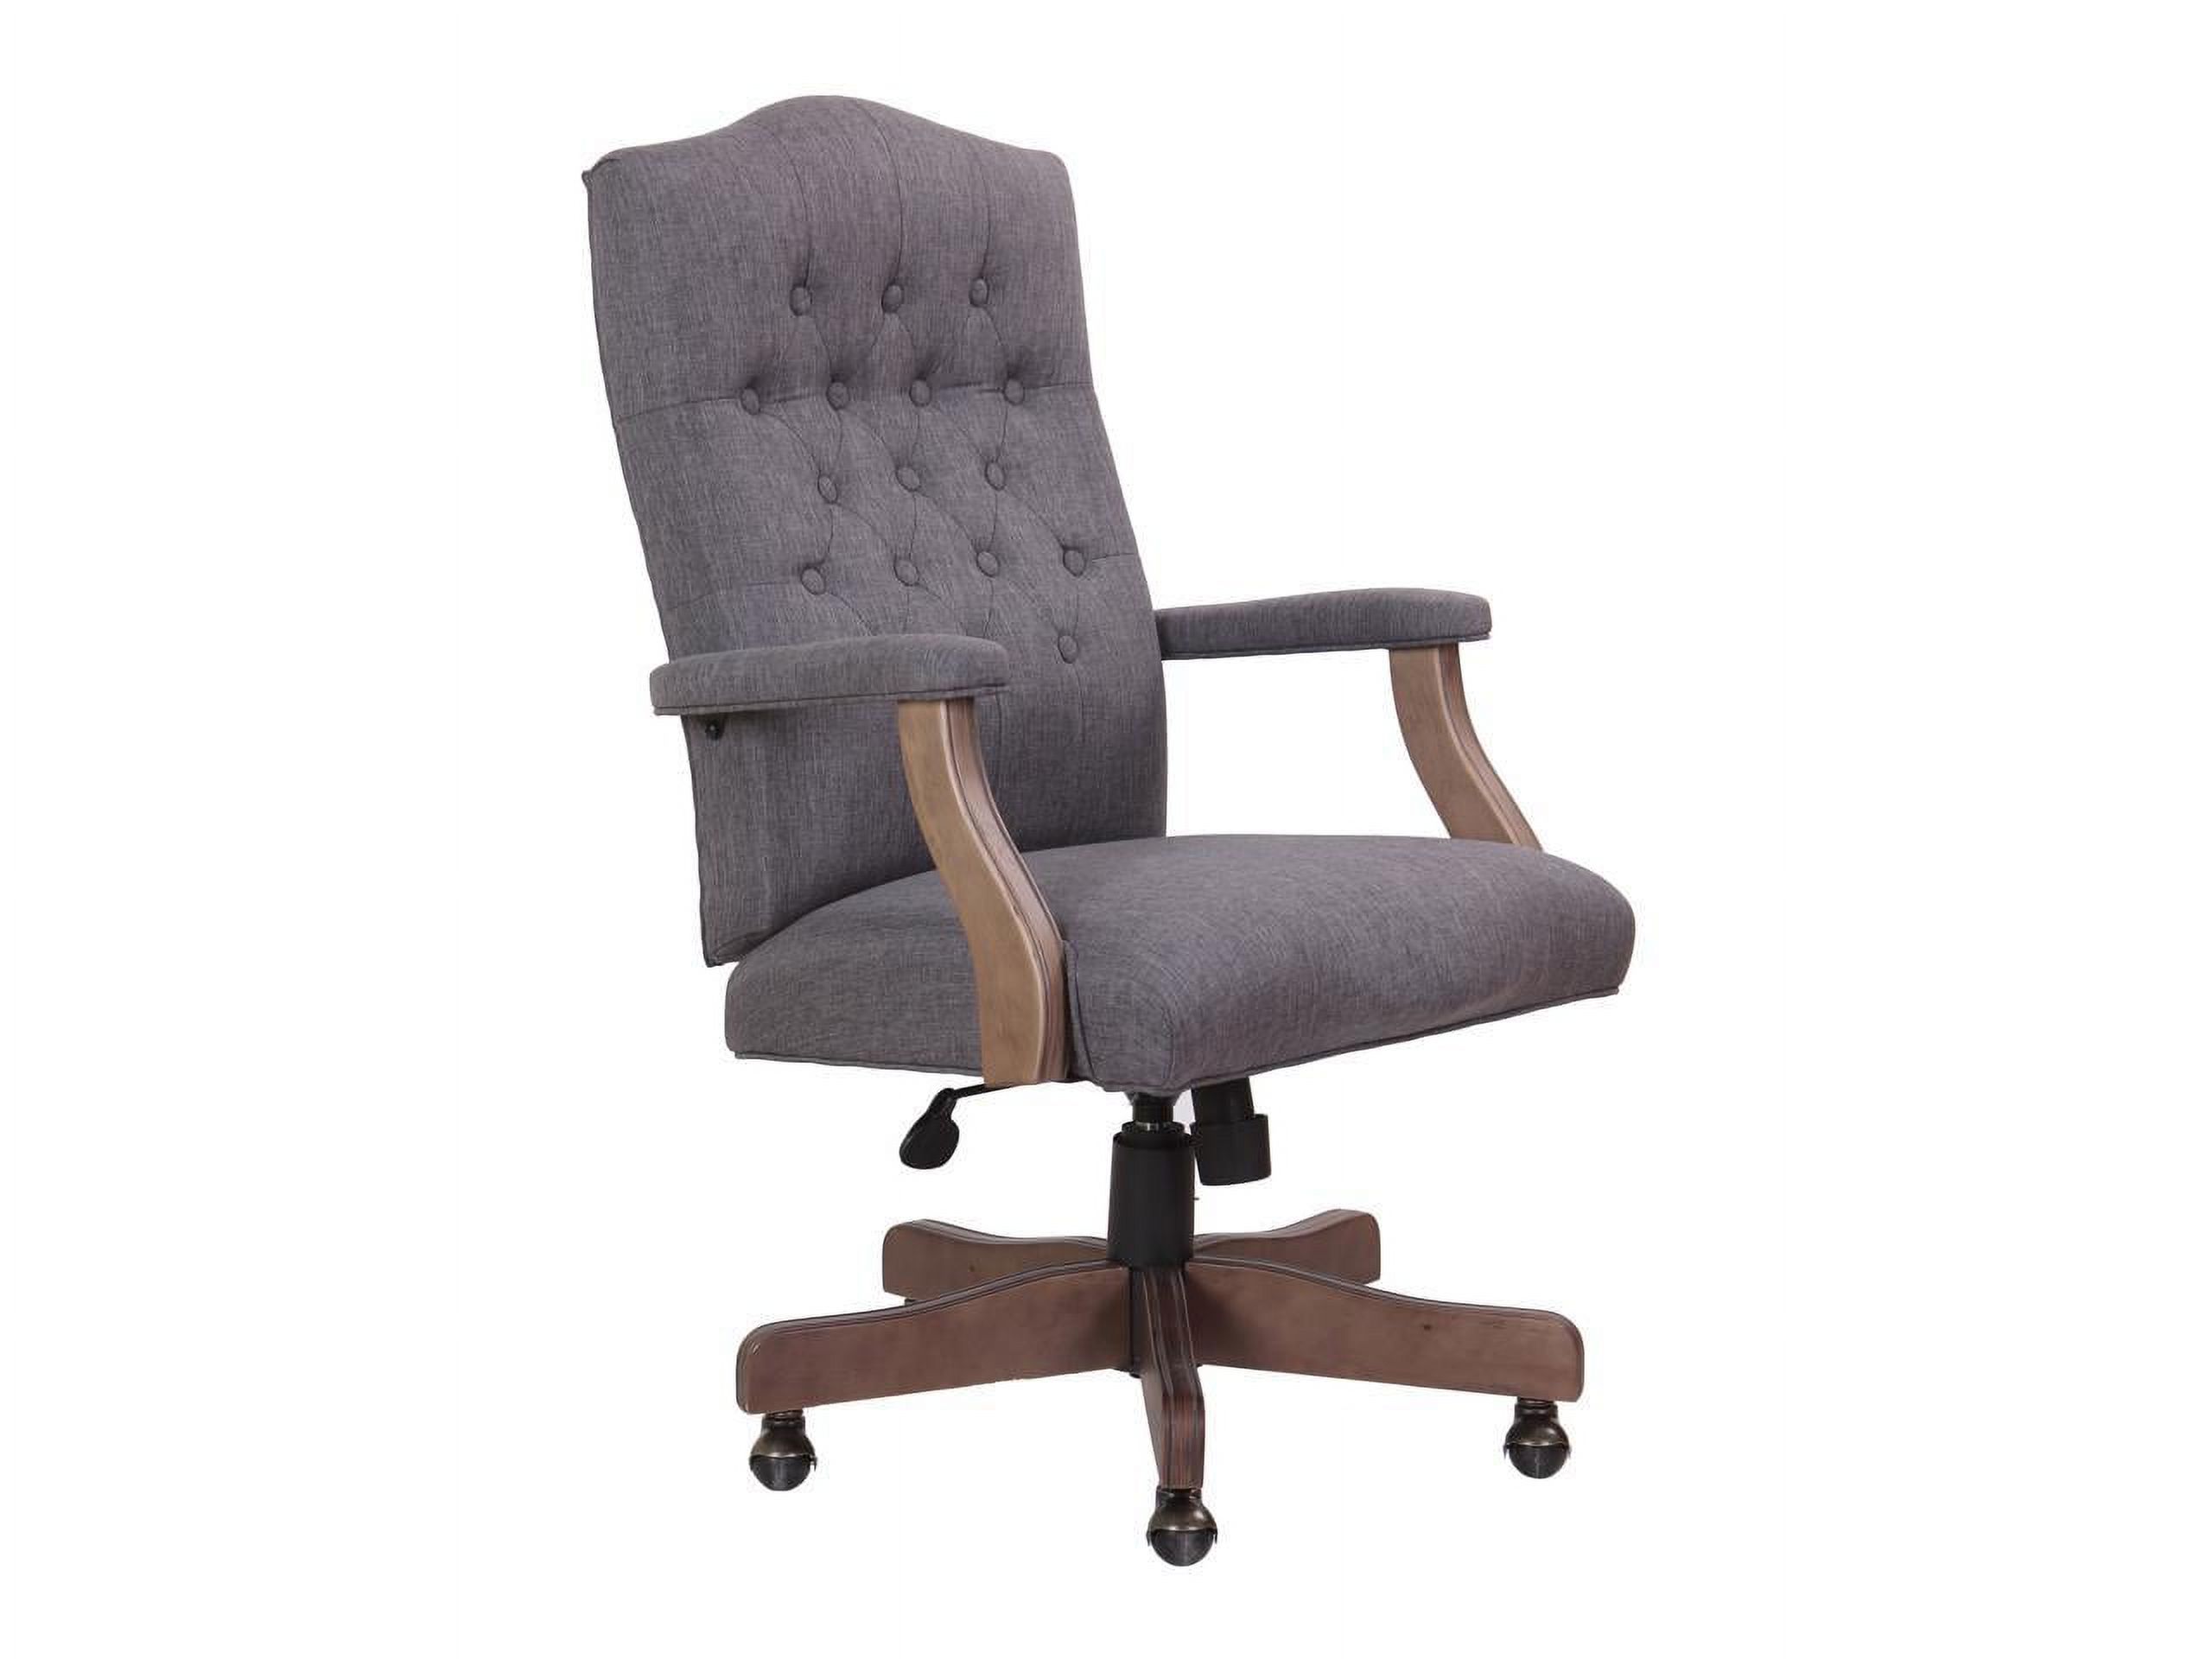 Boss Refined Rustic Executive Chair in Slate Gray Commercial Grade - image 1 of 8